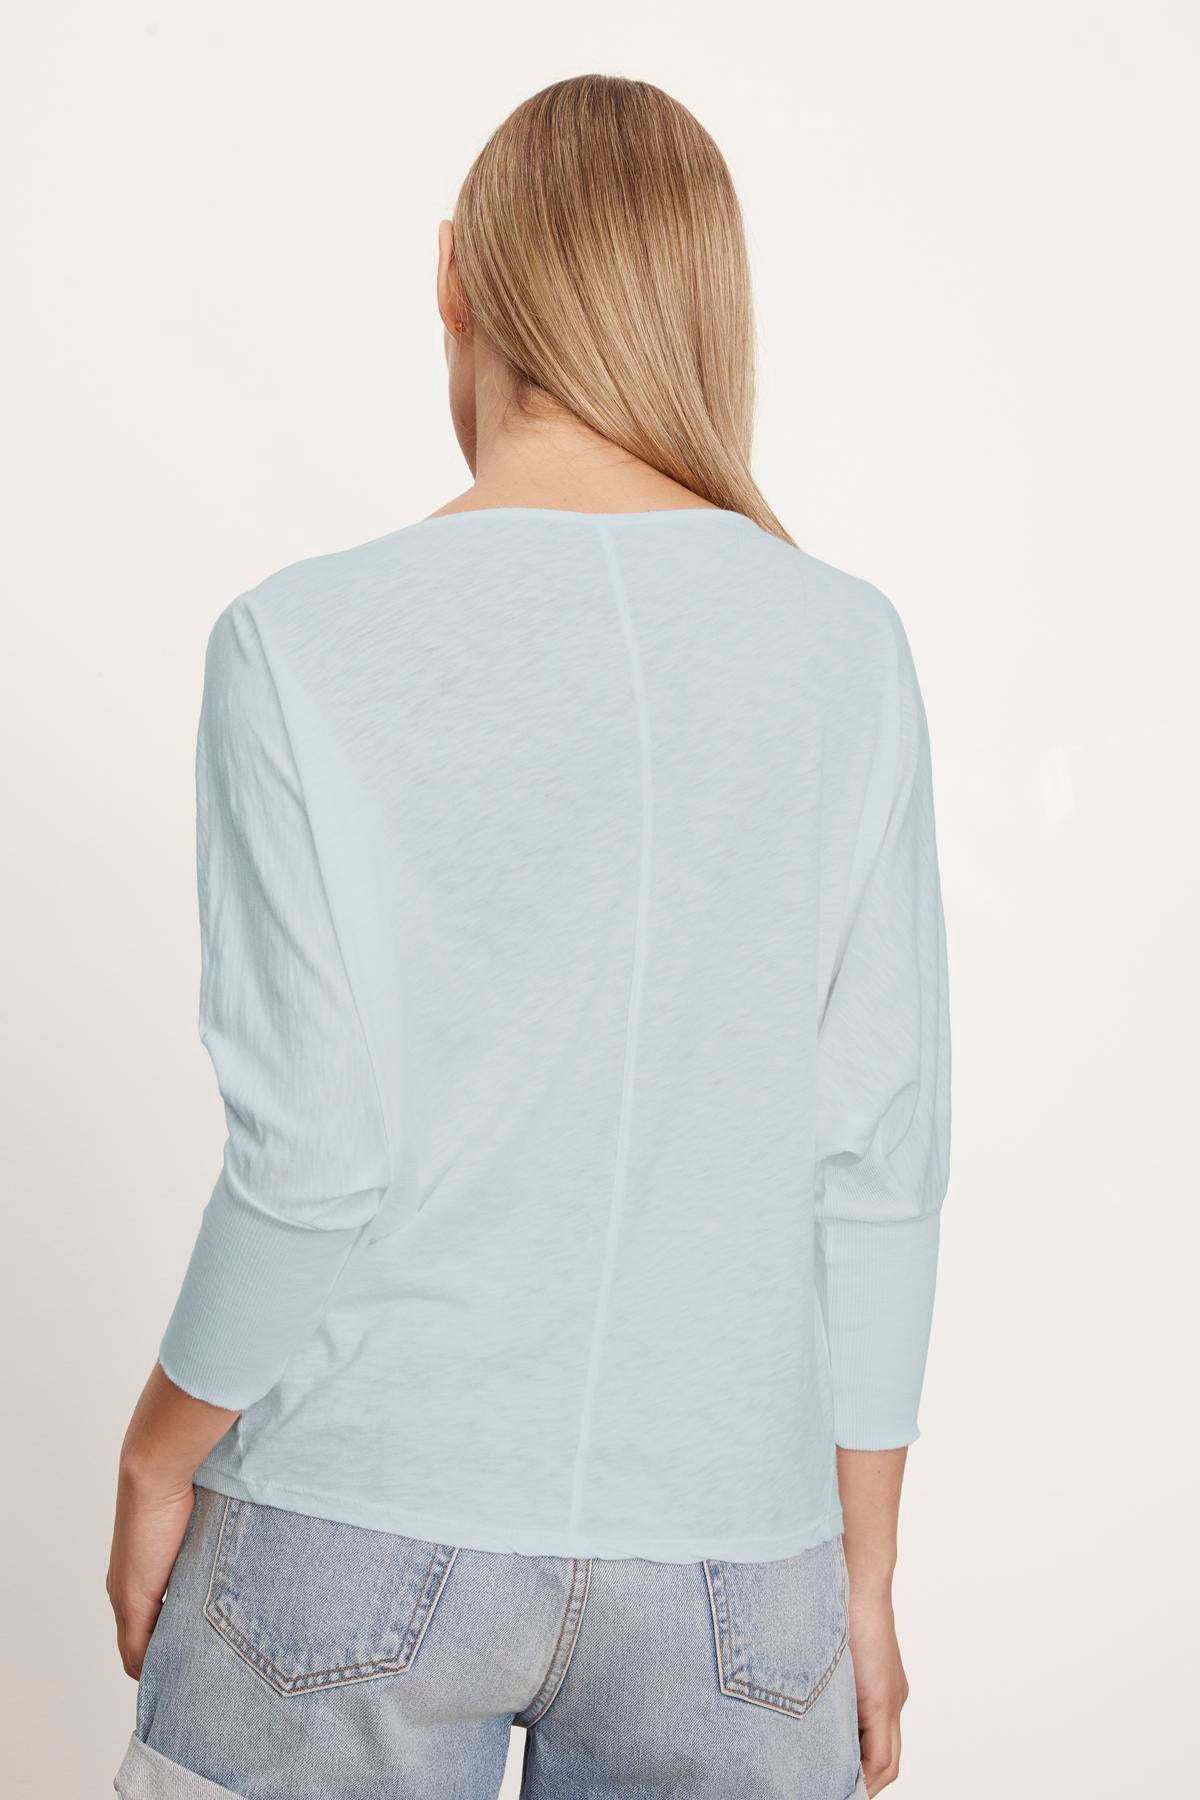 A woman with long blonde hair is shown from the back, wearing a light blue, slightly cropped Velvet by Graham & Spencer JOSS DOLMAN SLEEVE TEE and light-colored jeans.-37249861583041